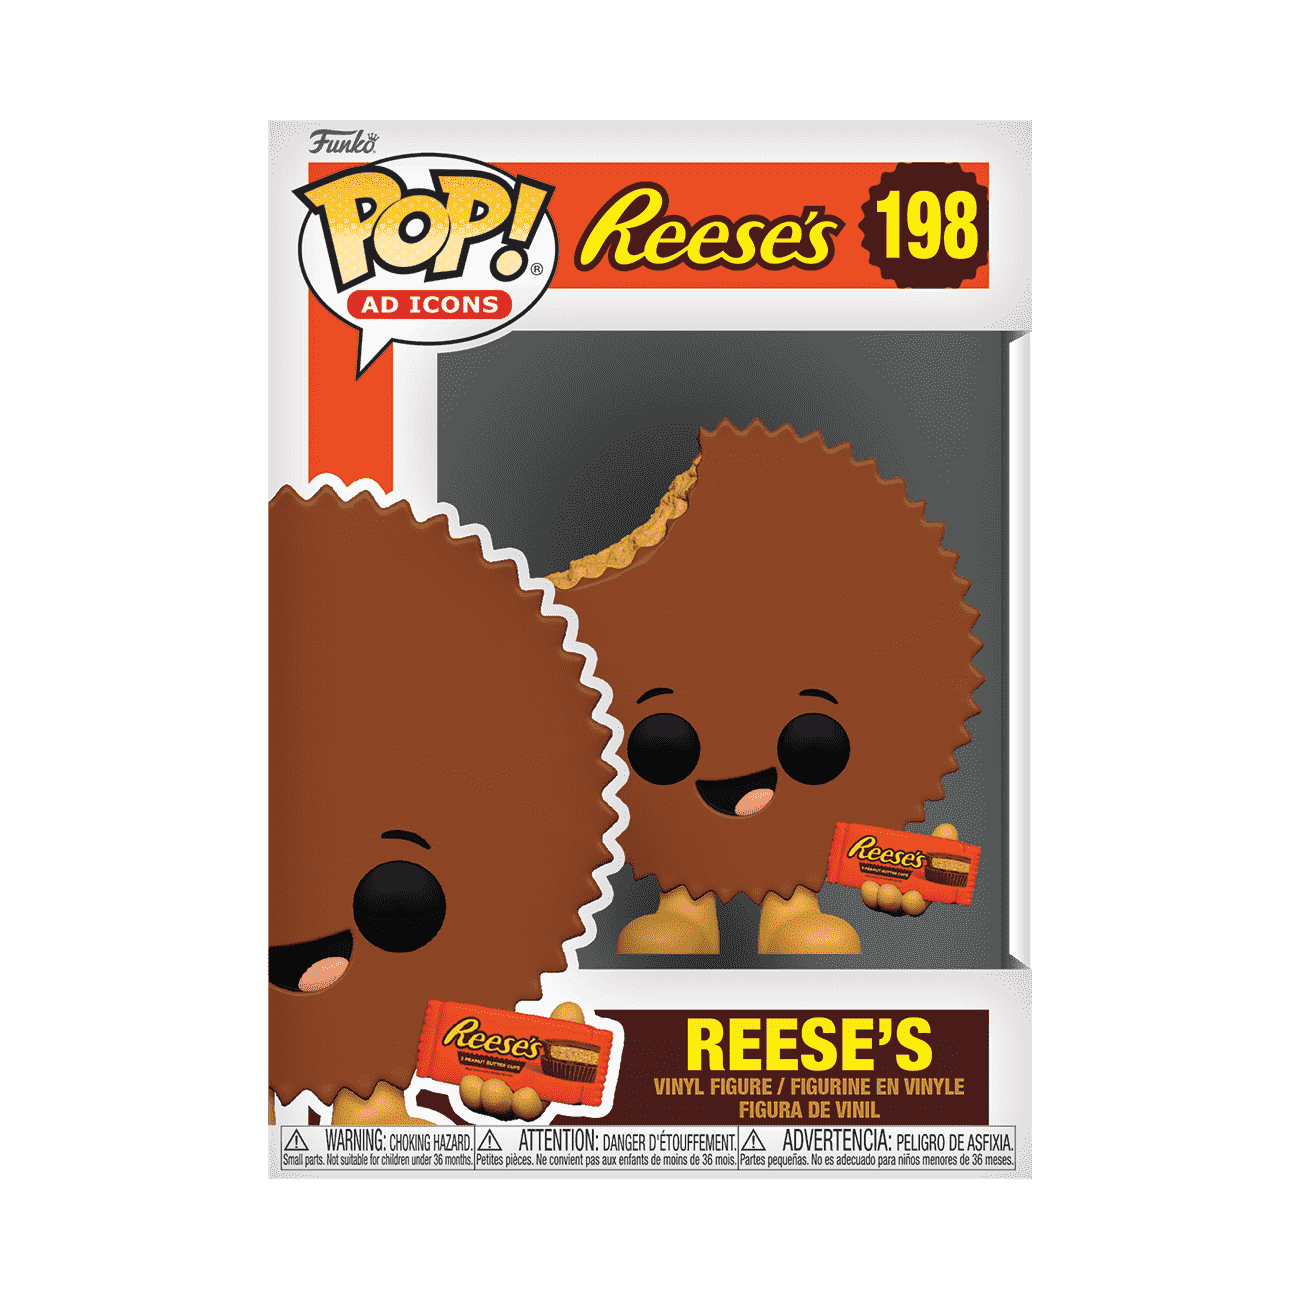 Buy Pop! Reese's Peanut Butter Cup at Funko.